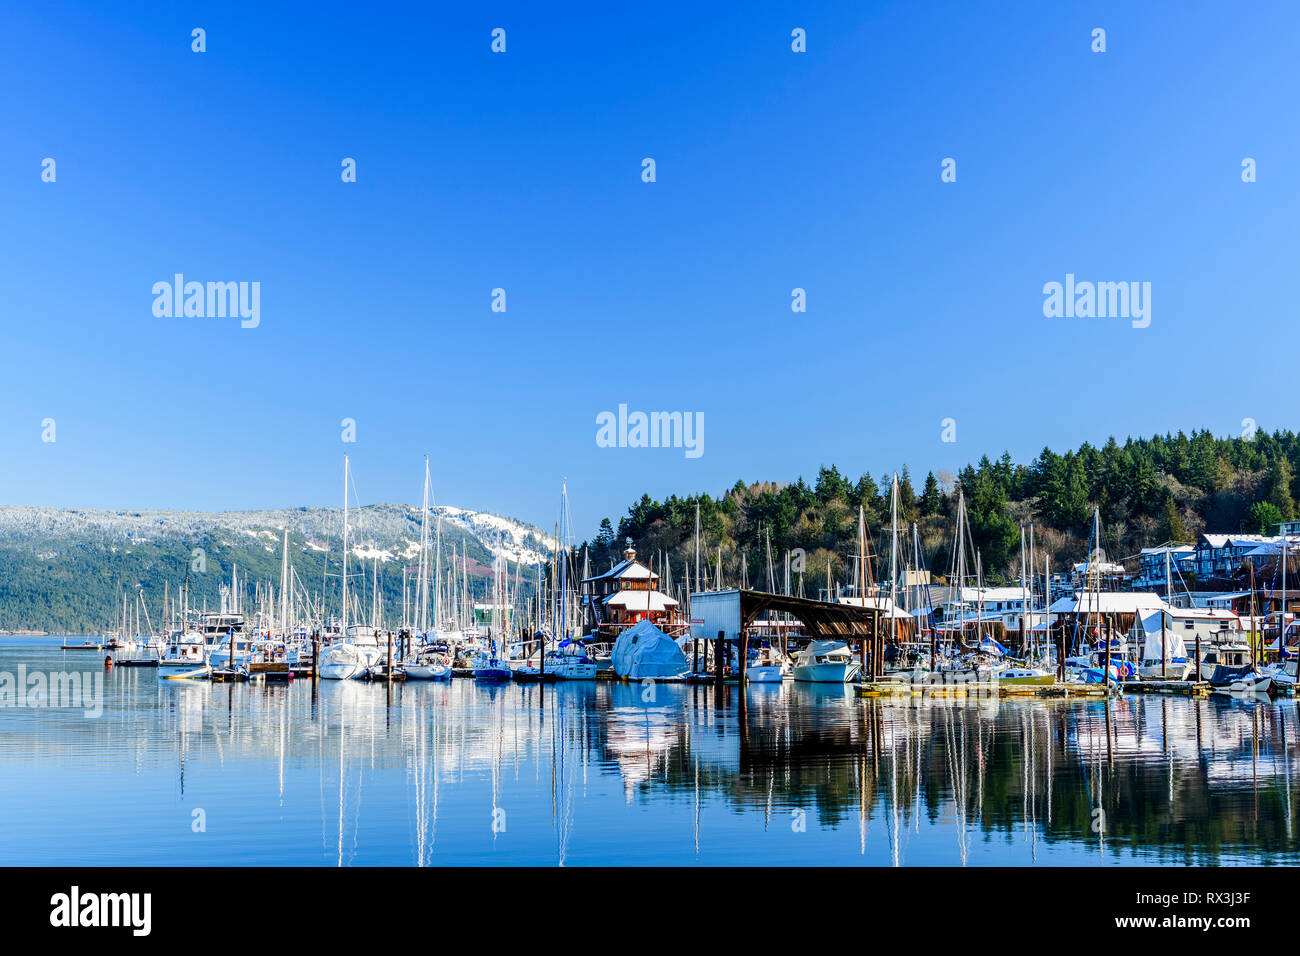 Some of the marinas in Cowichan Bay, British Columbia Stock Photo